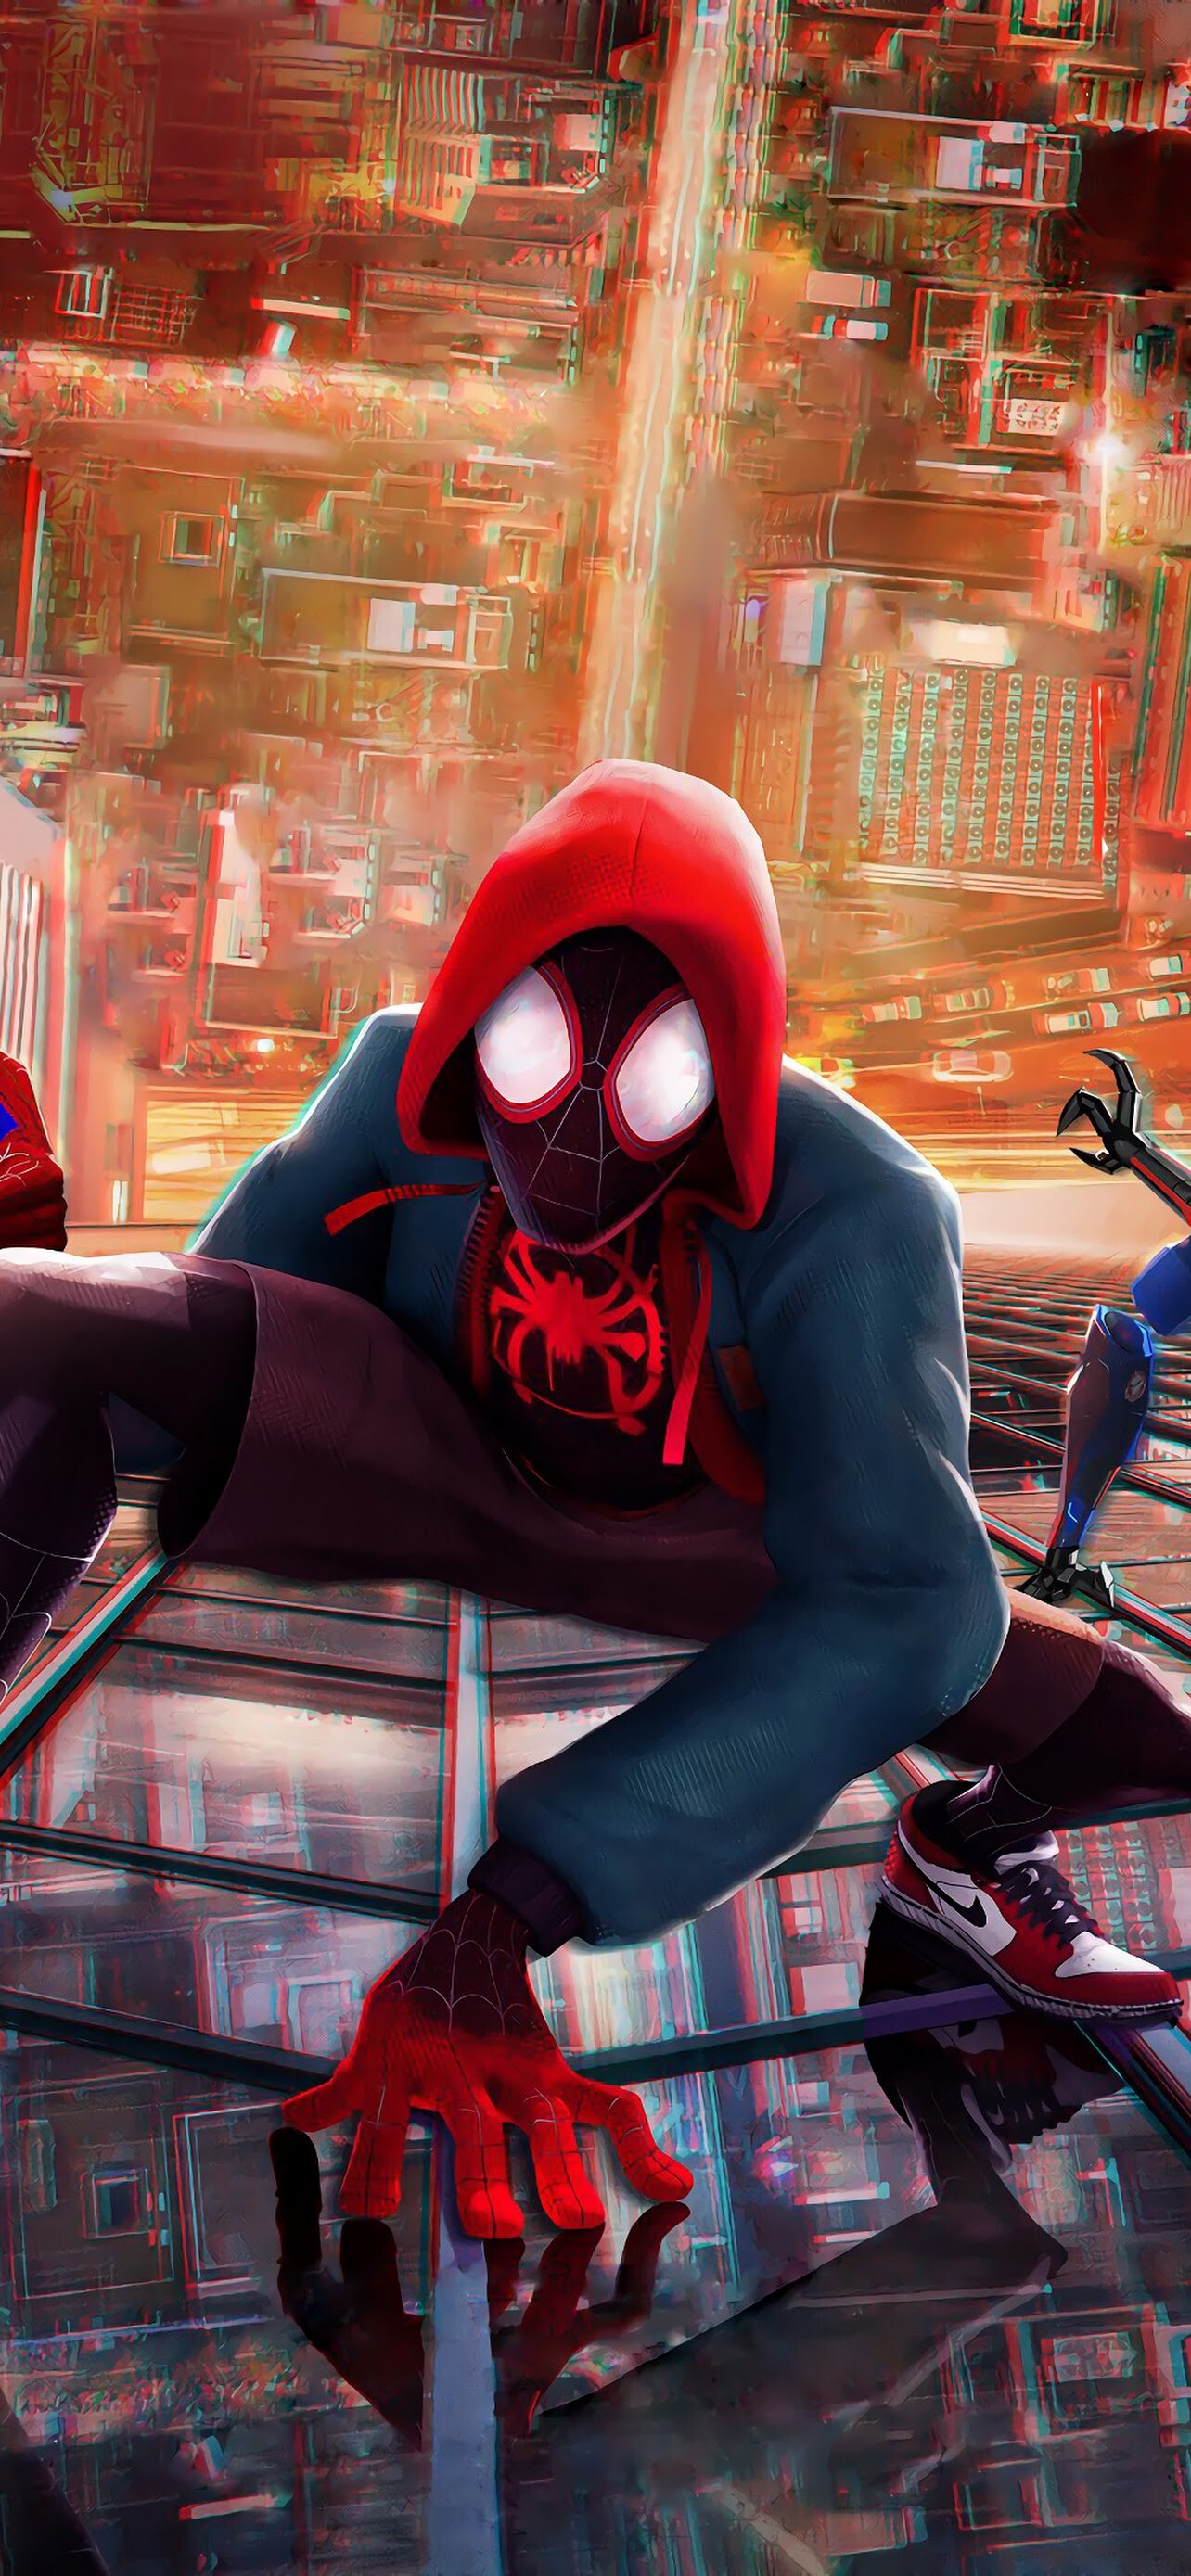 Spider-Man: Into the Spider-Verse: Miles Morales, a teenager attending an exclusive prep school who is bitten by a radioactive spider. 1290x2780 HD Wallpaper.